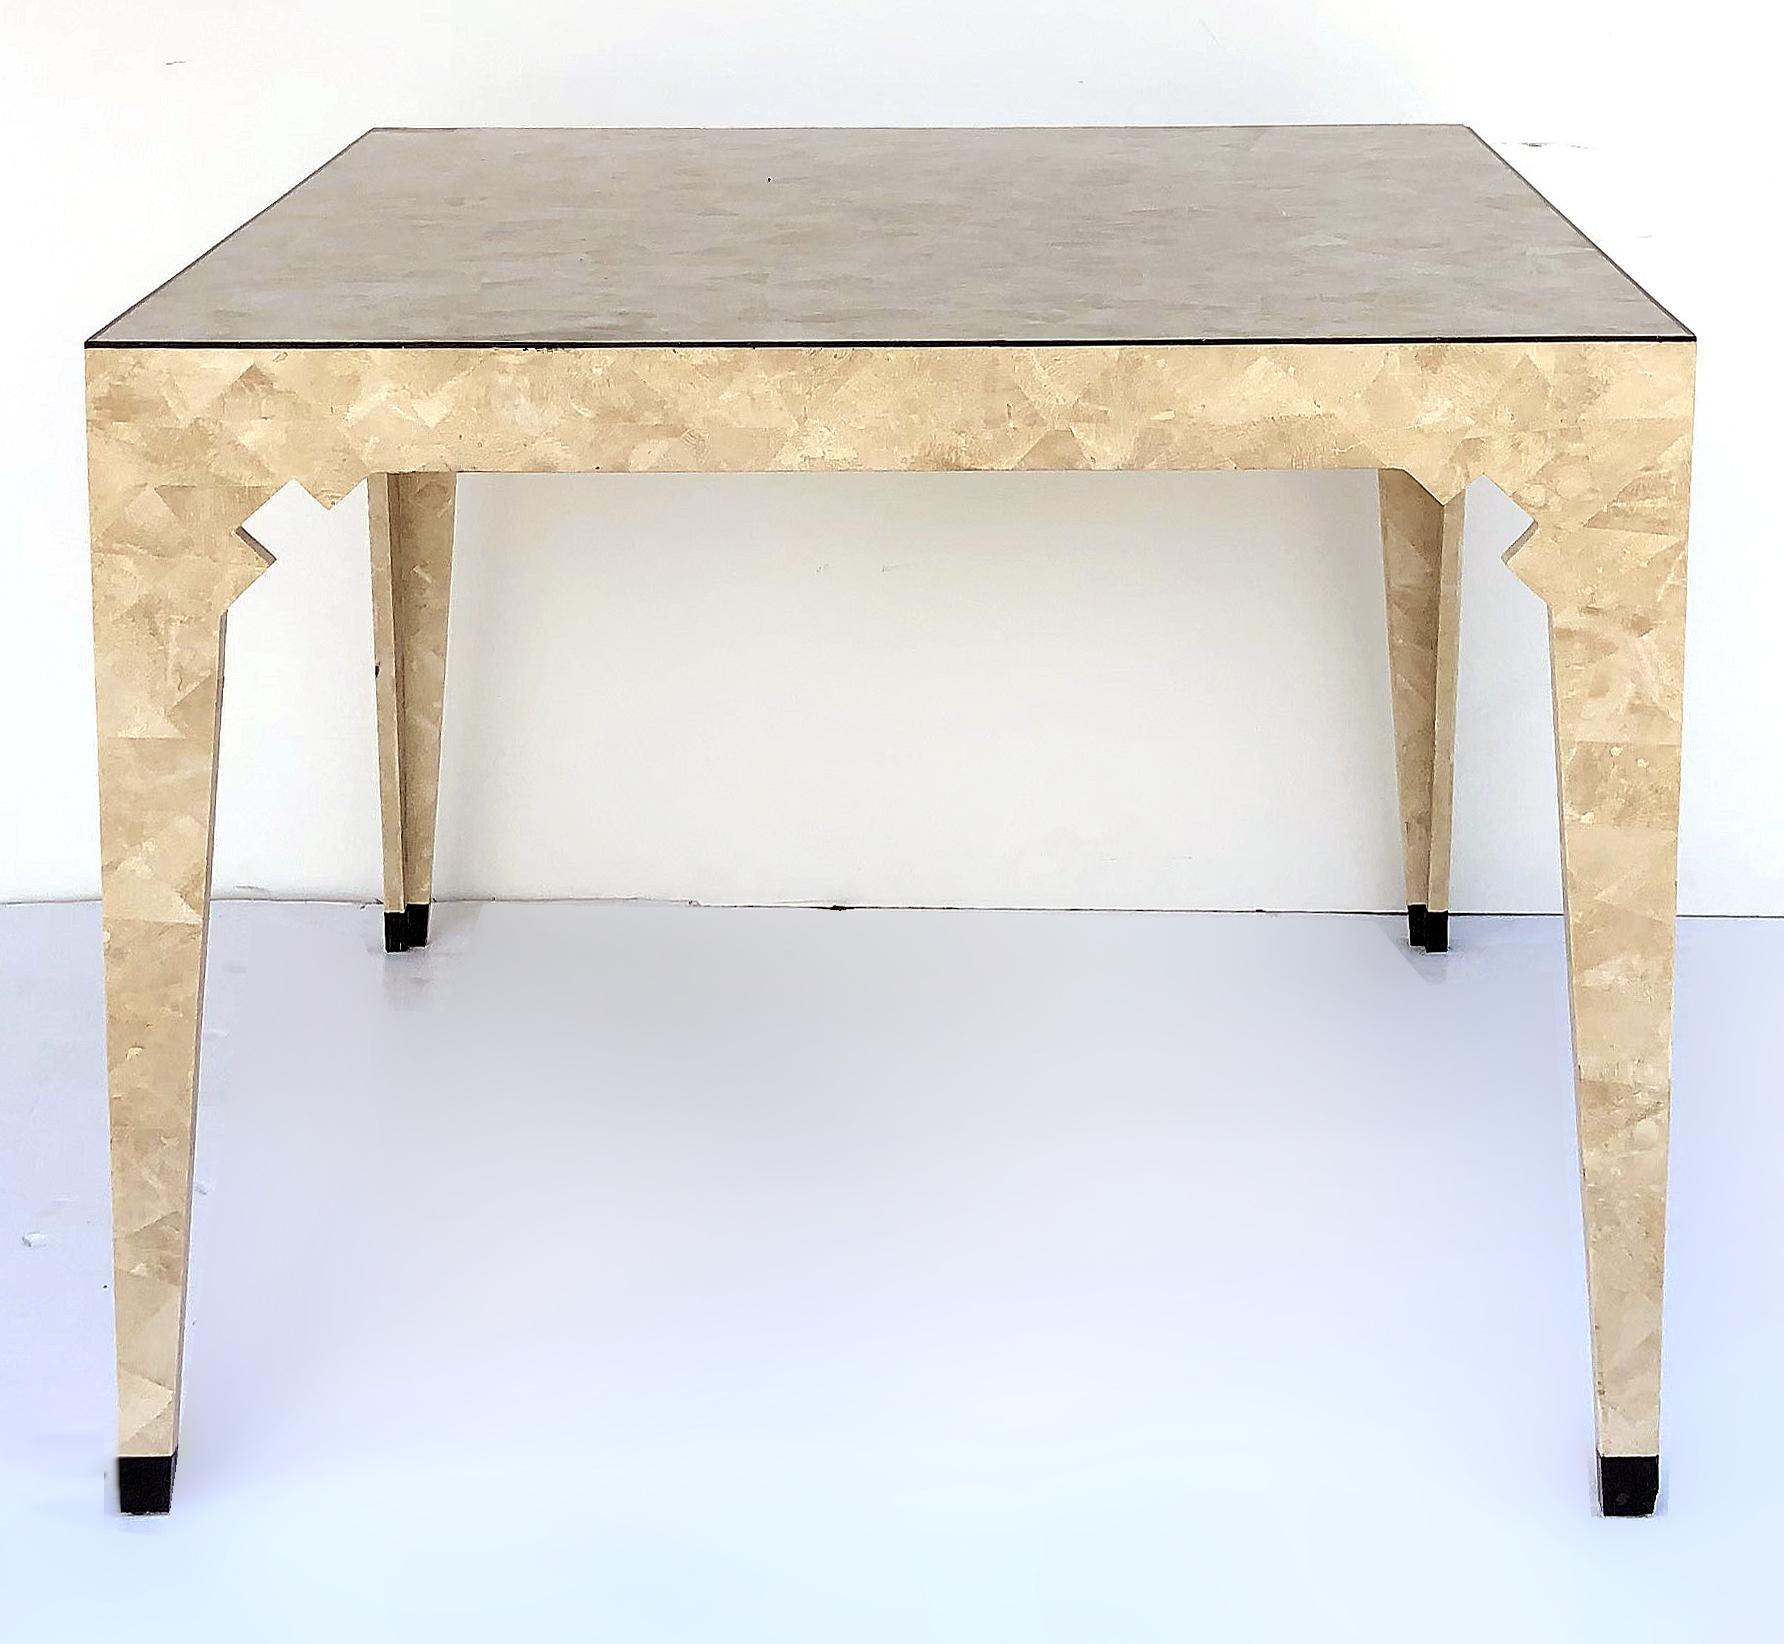 Oggetti Italian modern tessellated stone game table.

Offered for sale is a 1980s Italian modern tessellated stone game table modern from the Tavola Collection for Oggetti. The square game table is a circa 1970s-1980s tessellated stone tile clad